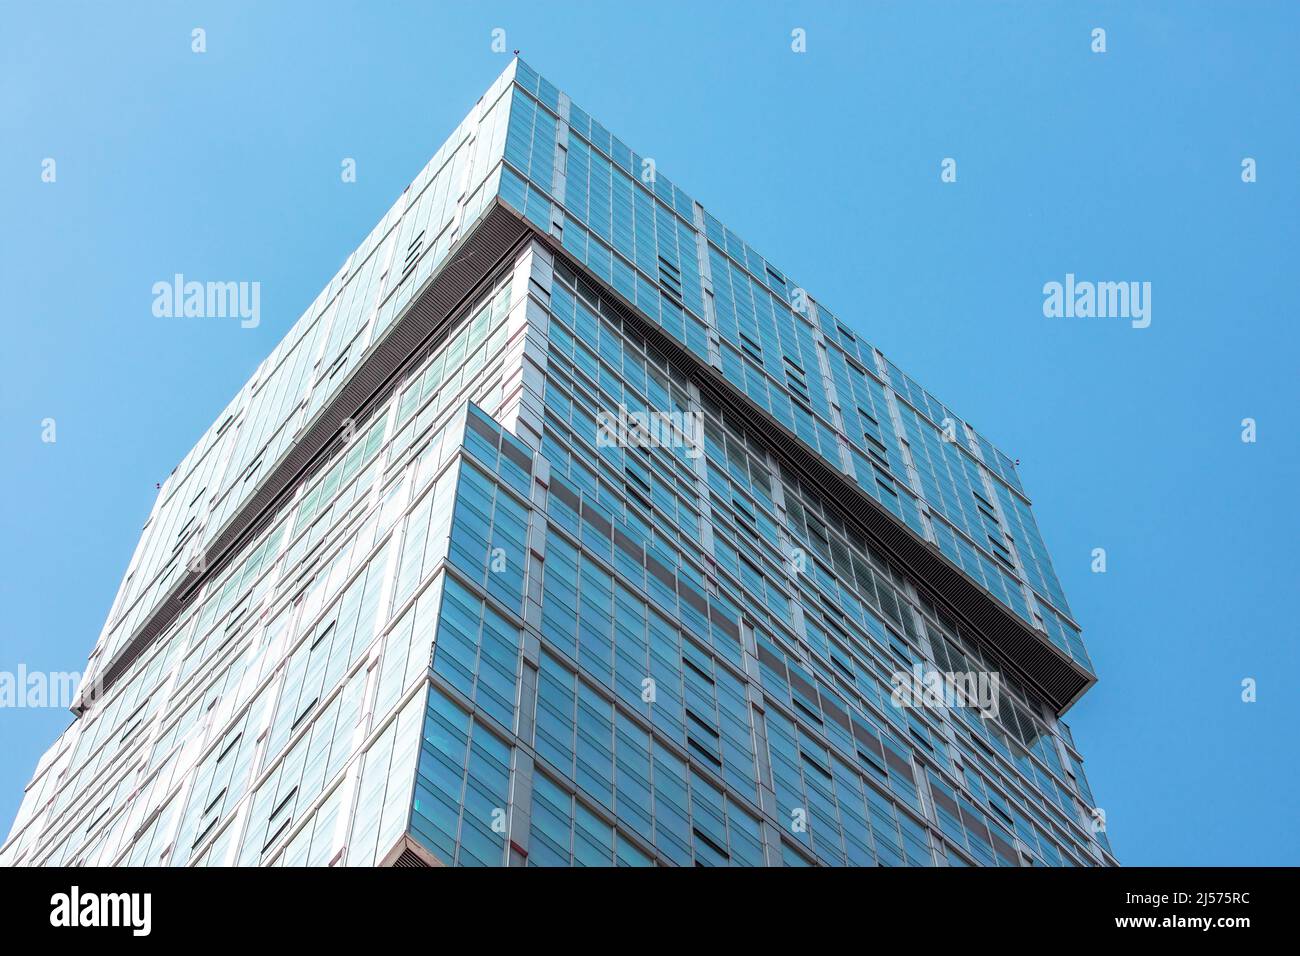 Glass facades of a window of financial skyscrapers, a corner of a building close-up Stock Photo